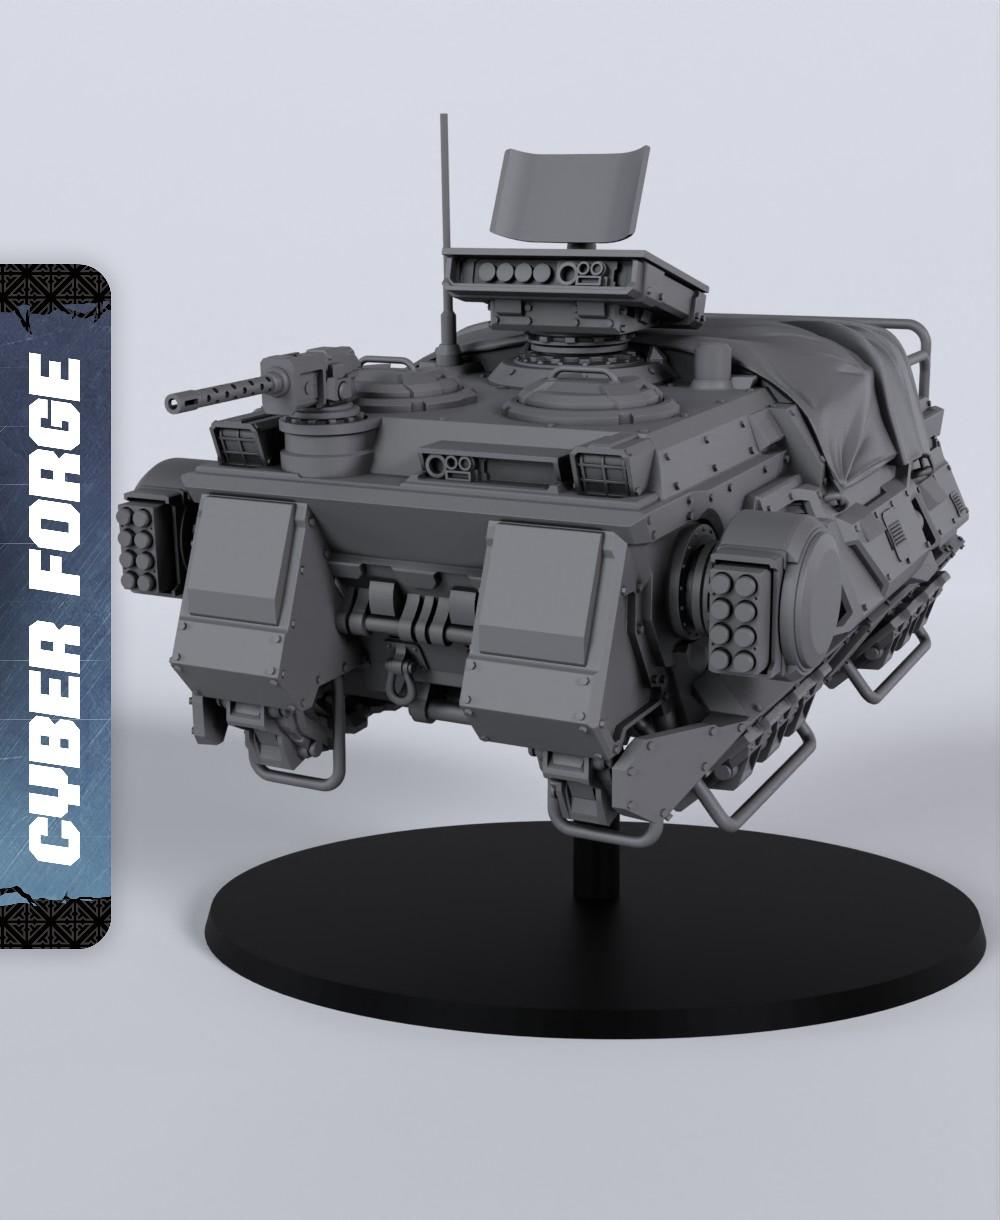 ISR-7 Flamecloud - With Free Cyberpunk Warhammer - 40k Sci-Fi Gift Ideas for RPG and Wargamers 3d model